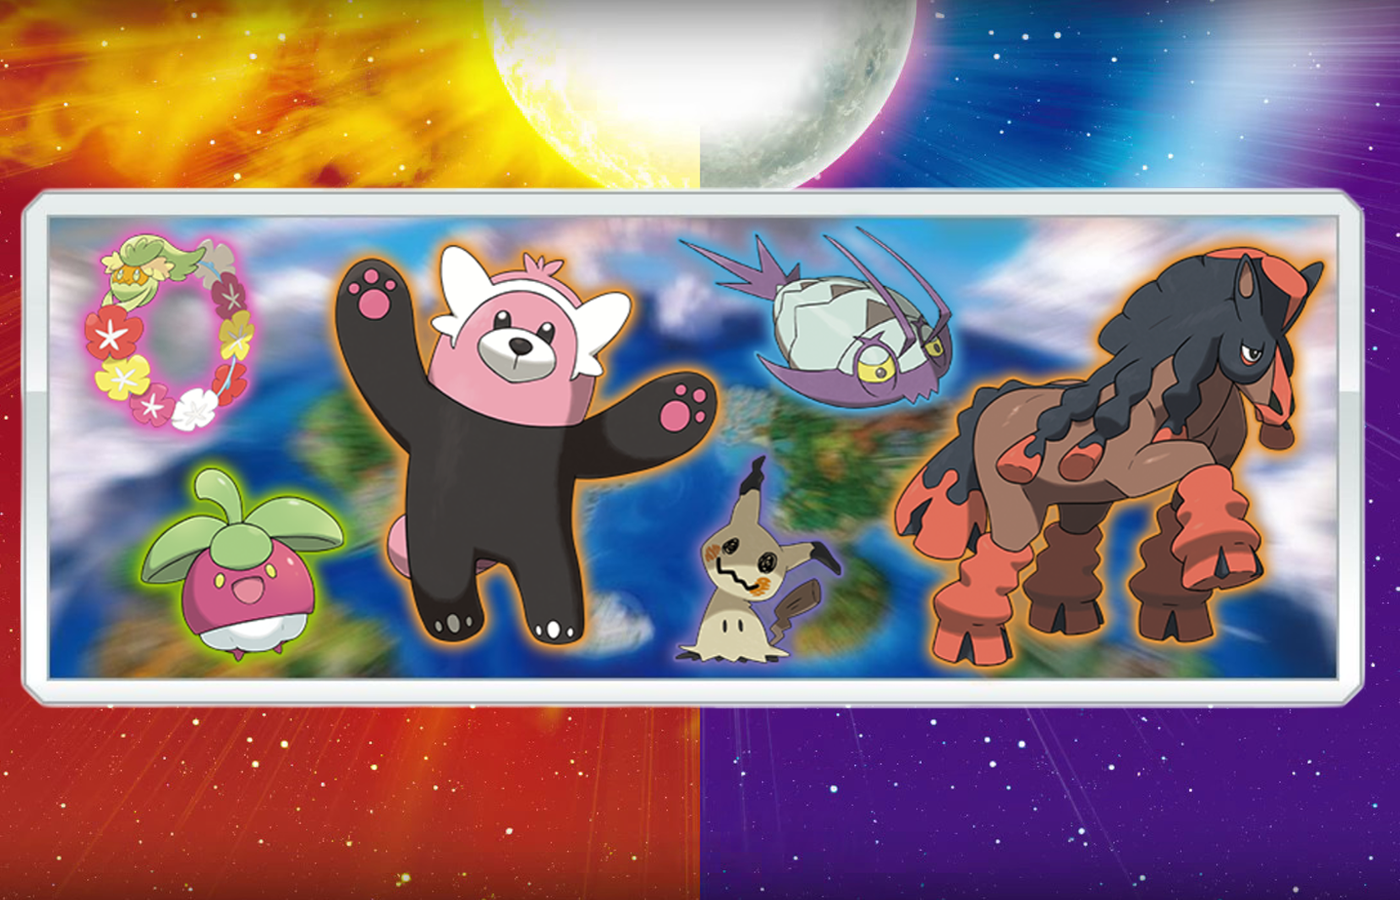 Pokémon Sun' and 'Moon' games to launch new online training features; new Pokémon  characters to be introduced